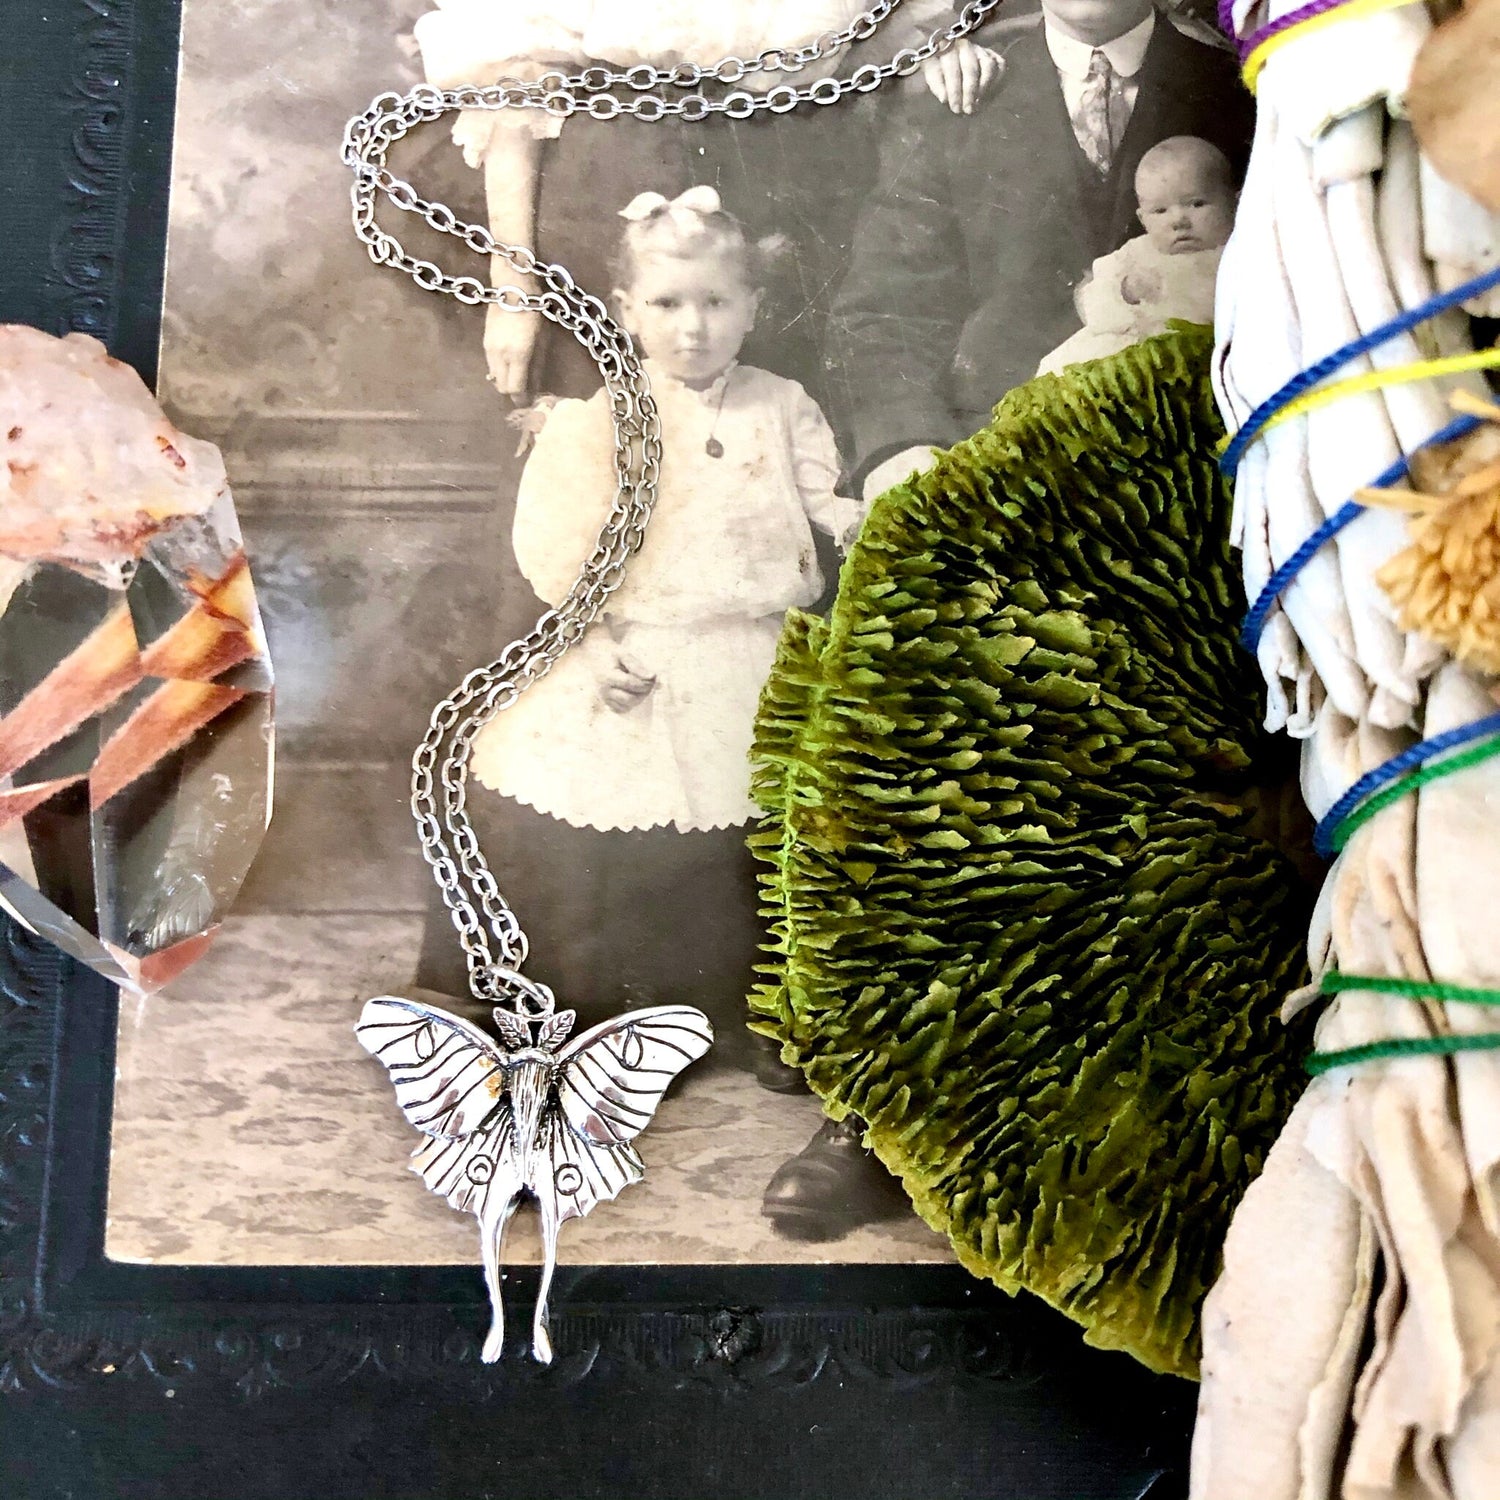 Tiny Talisman Collection - Sterling Silver Luna Moth Necklace Pendant 23x24mm / Curated Collection